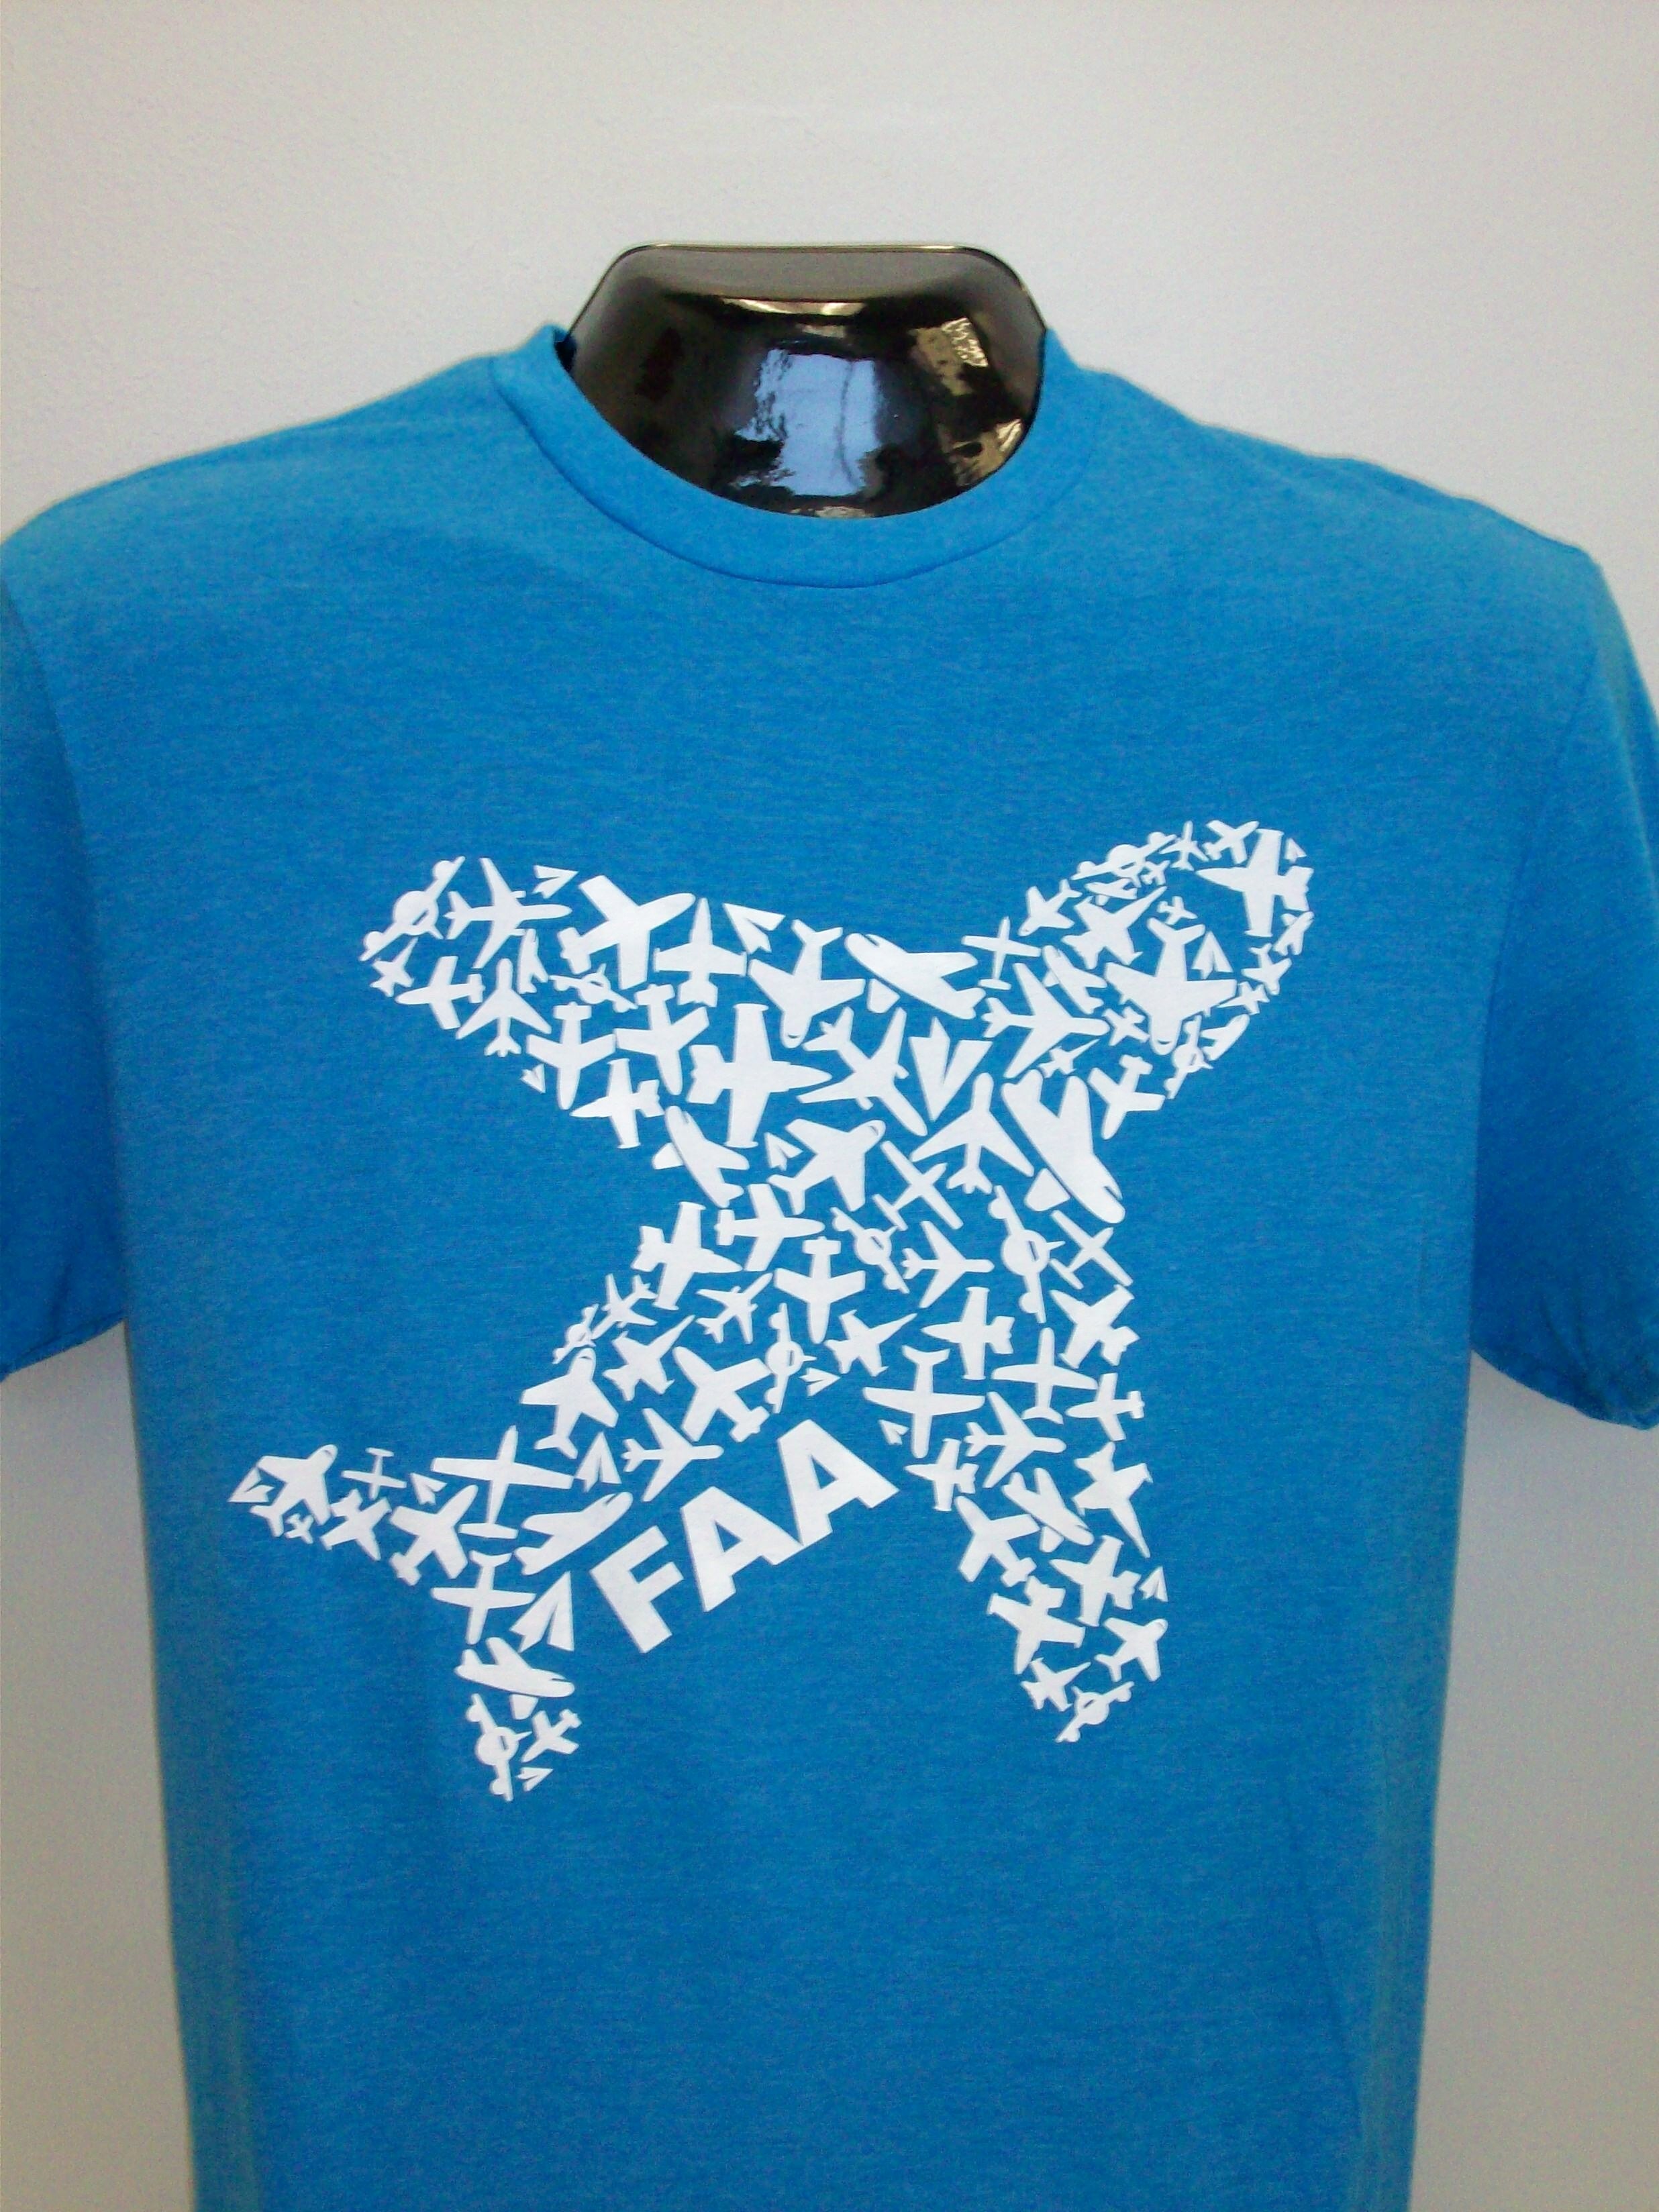 T-shirt FAA Adult Airplane - Turquoise